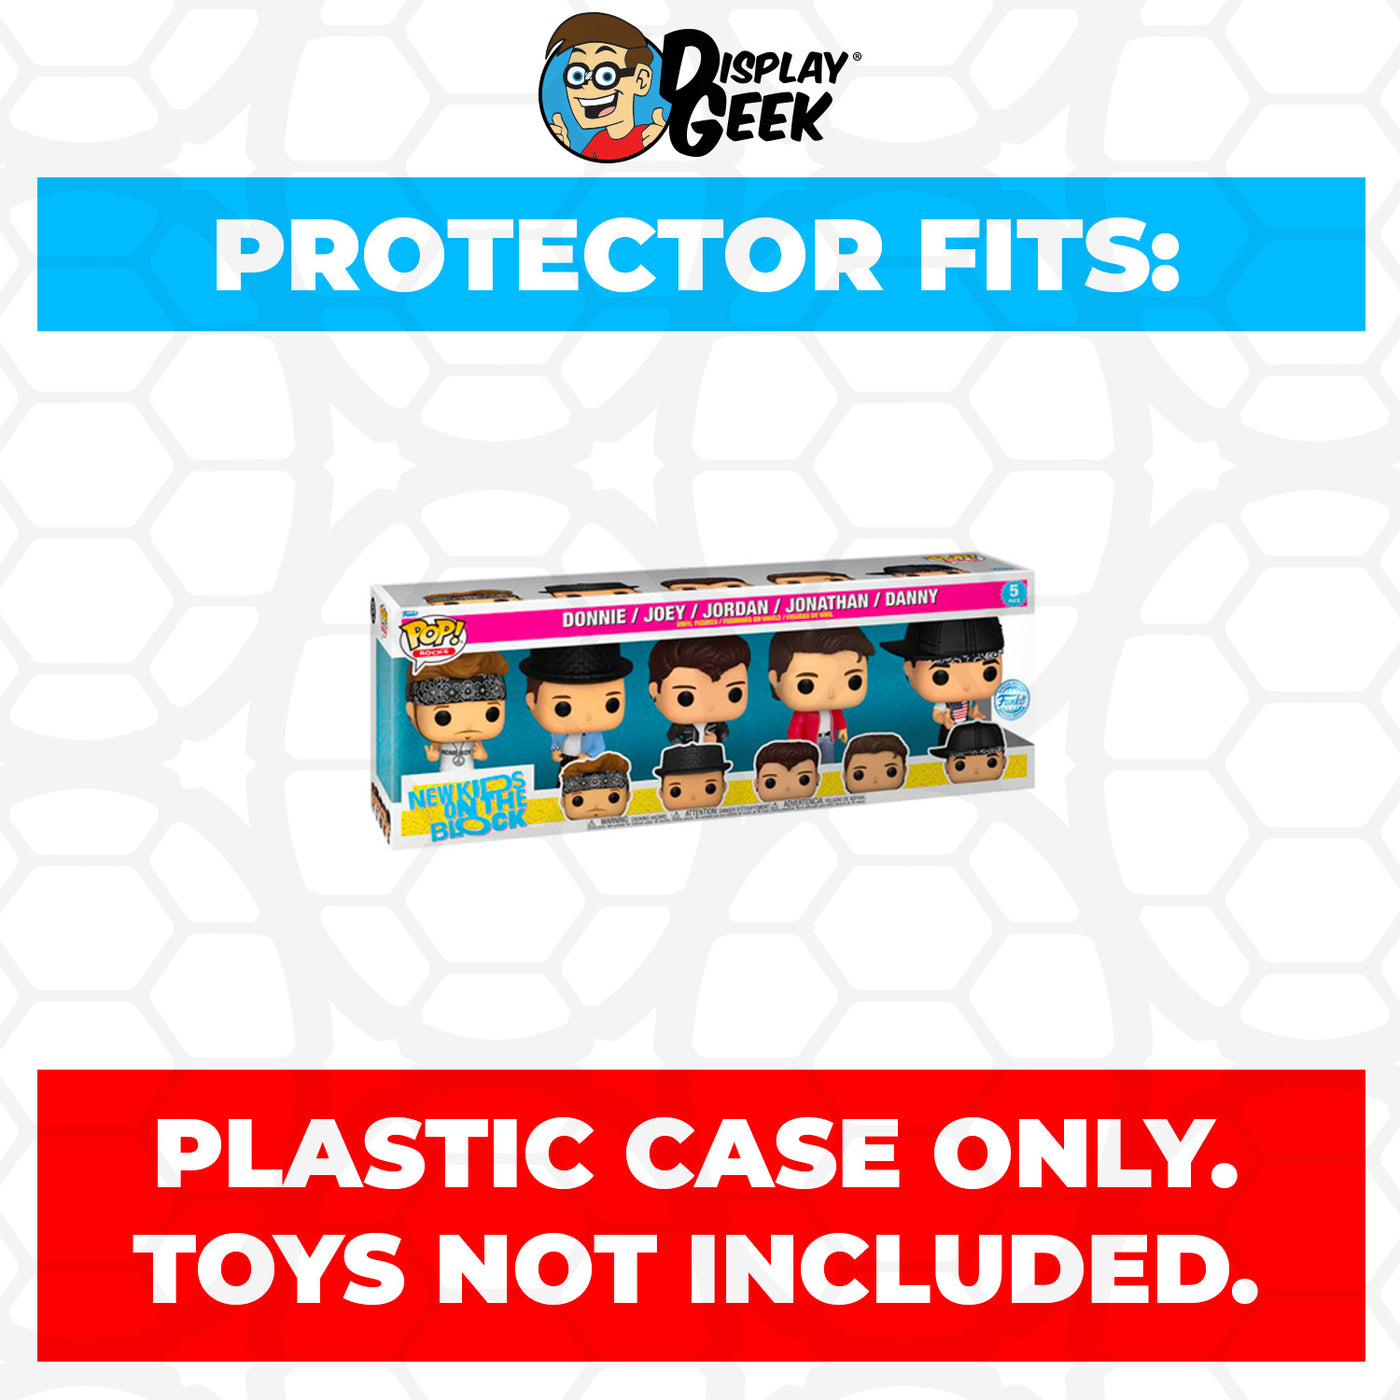 Pop Protector for 5 Pack New Kids on the Block Donnie, Joey, Jordan, Jonathan & Danny Funko Pop on The Protector Guide App by Display Geek